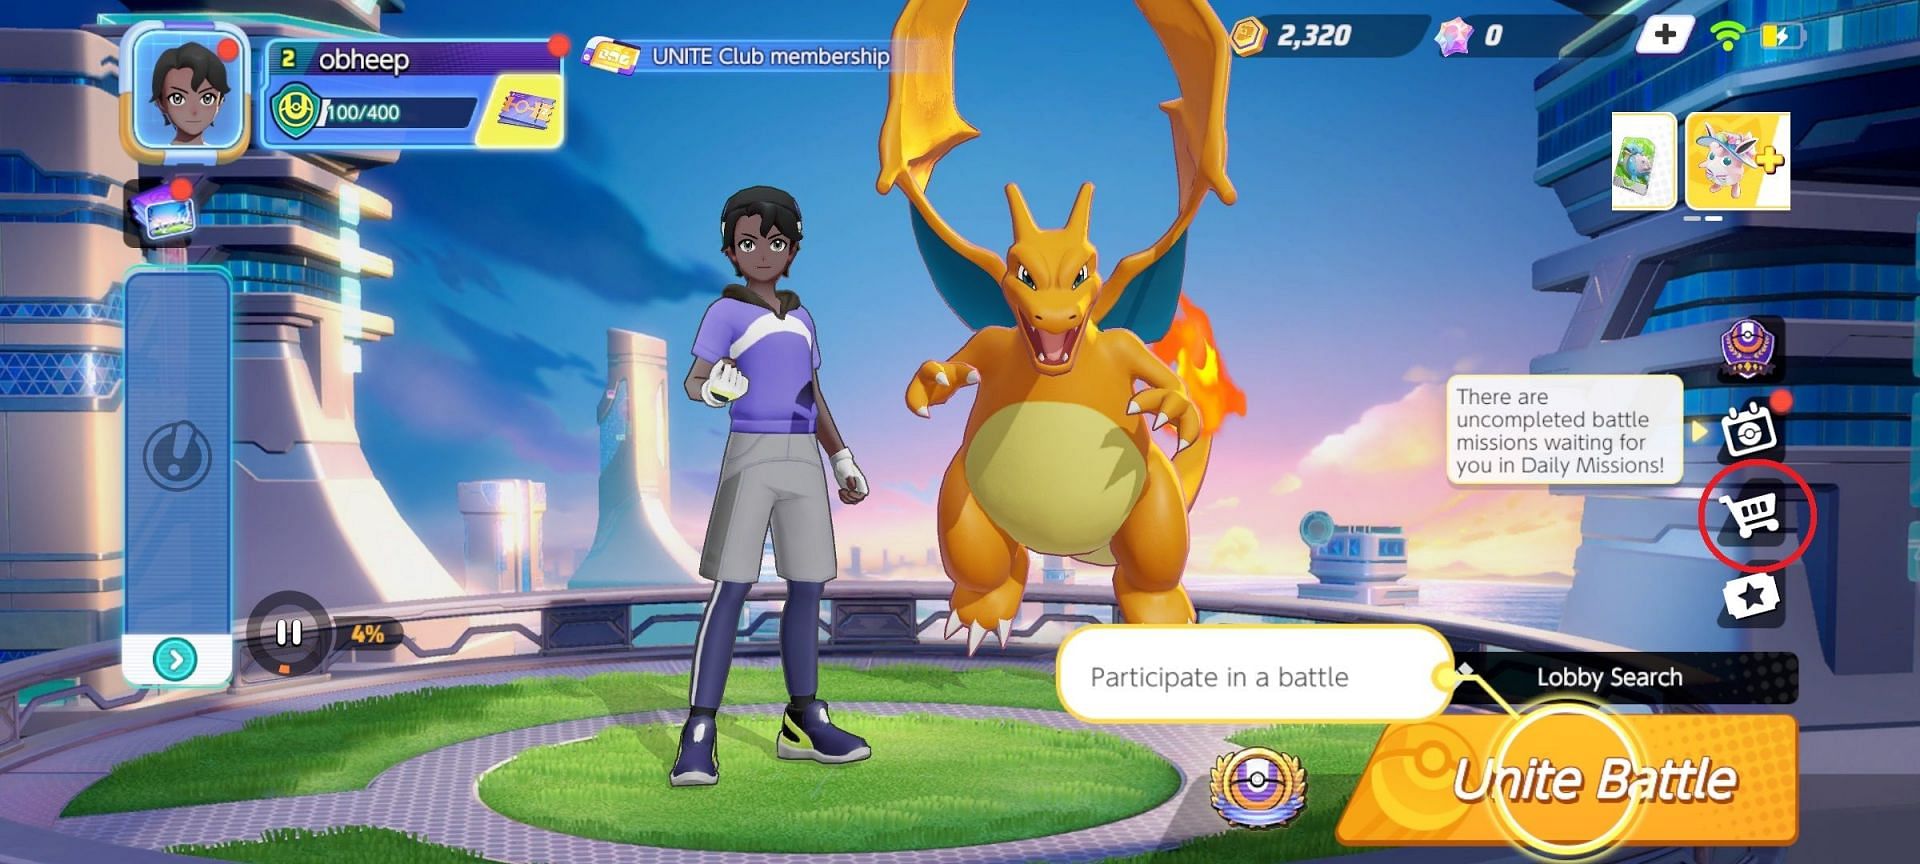 Homepage of the game contains the Shop icon near the bottom left corner (Image via The Pokemon Company)